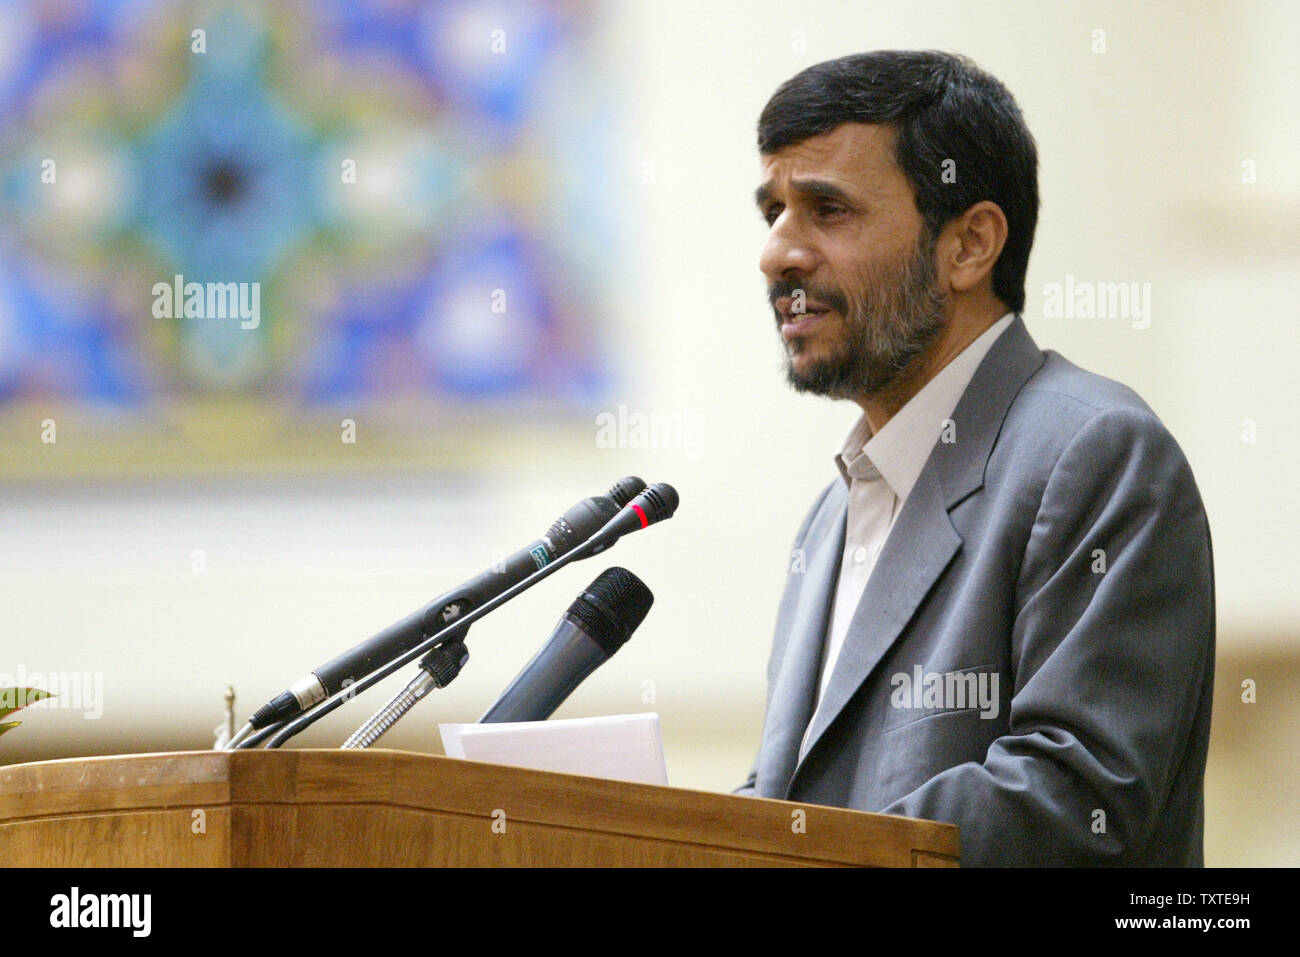 Iran's President Mahmoud Ahmadinejad speaks during the the Fourth Ahl-ul-Bait General Assembly in Tehran, Iran on August 18, 2007. Tehran has called illegal the alleged intention by the US government to formally apply the label of foreign terrorist organization to the Iranian Revolutionary Guard. (UPI Photo/Mohammad Kheirkhah) Stock Photo